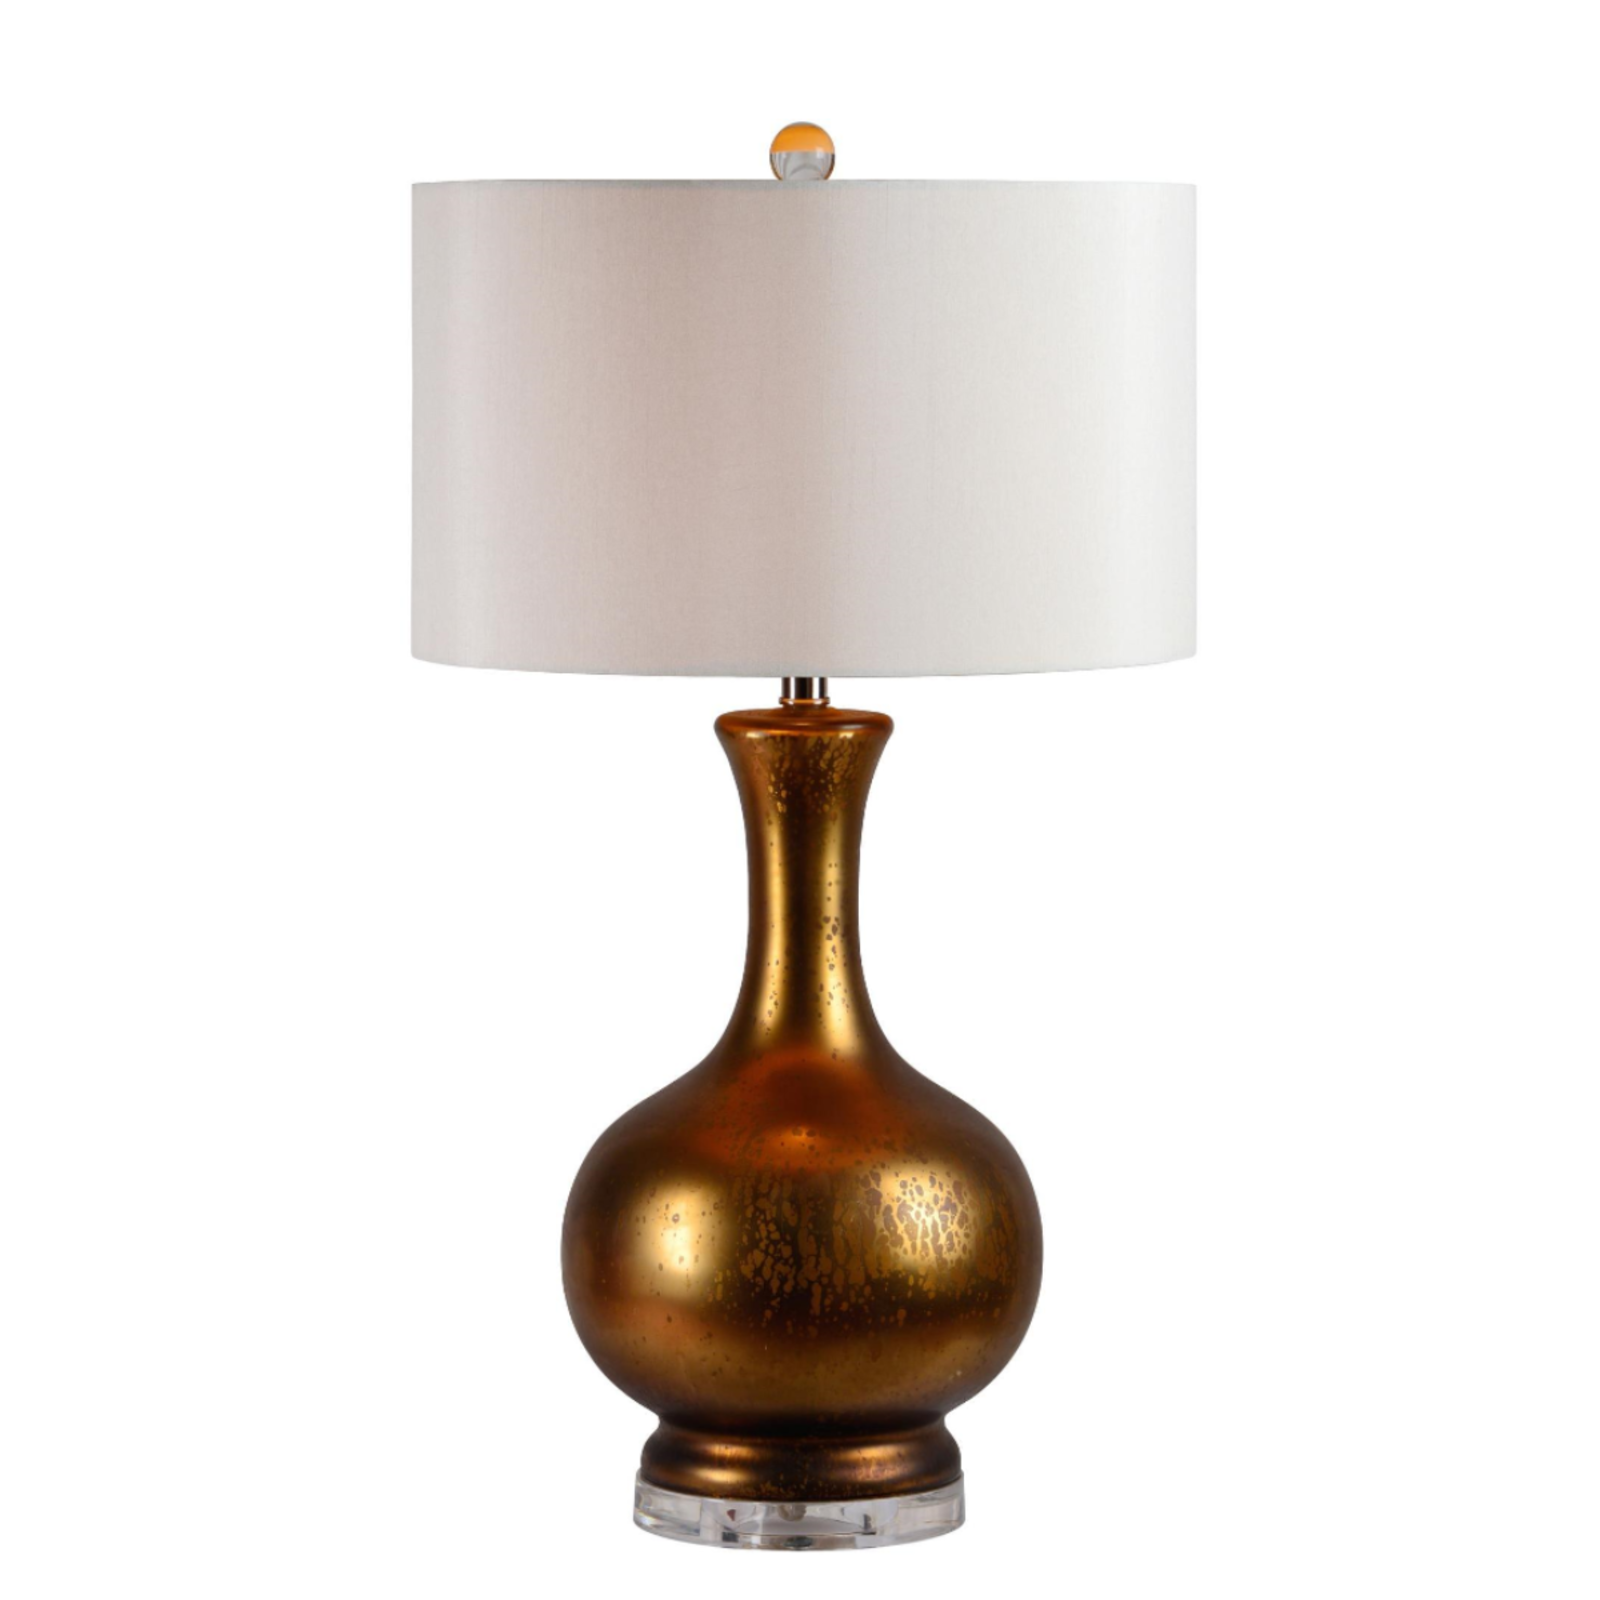 Forty West Cleopatra Table Lamp  72502 loading=